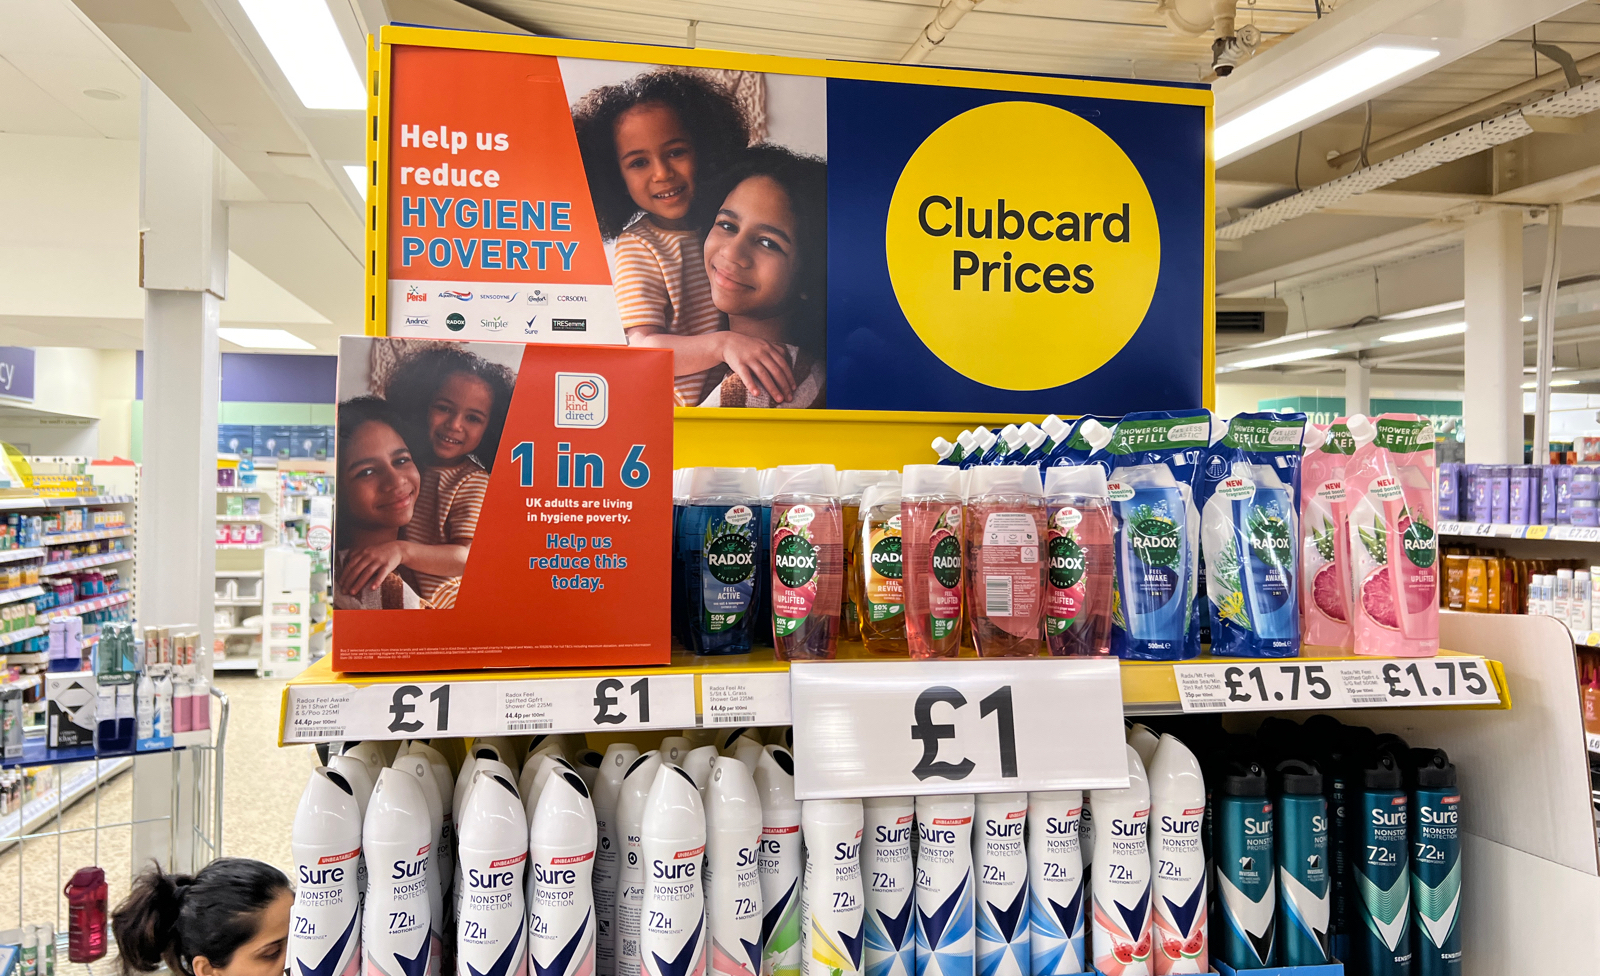 Hygiene poverty campaign in Tesco store